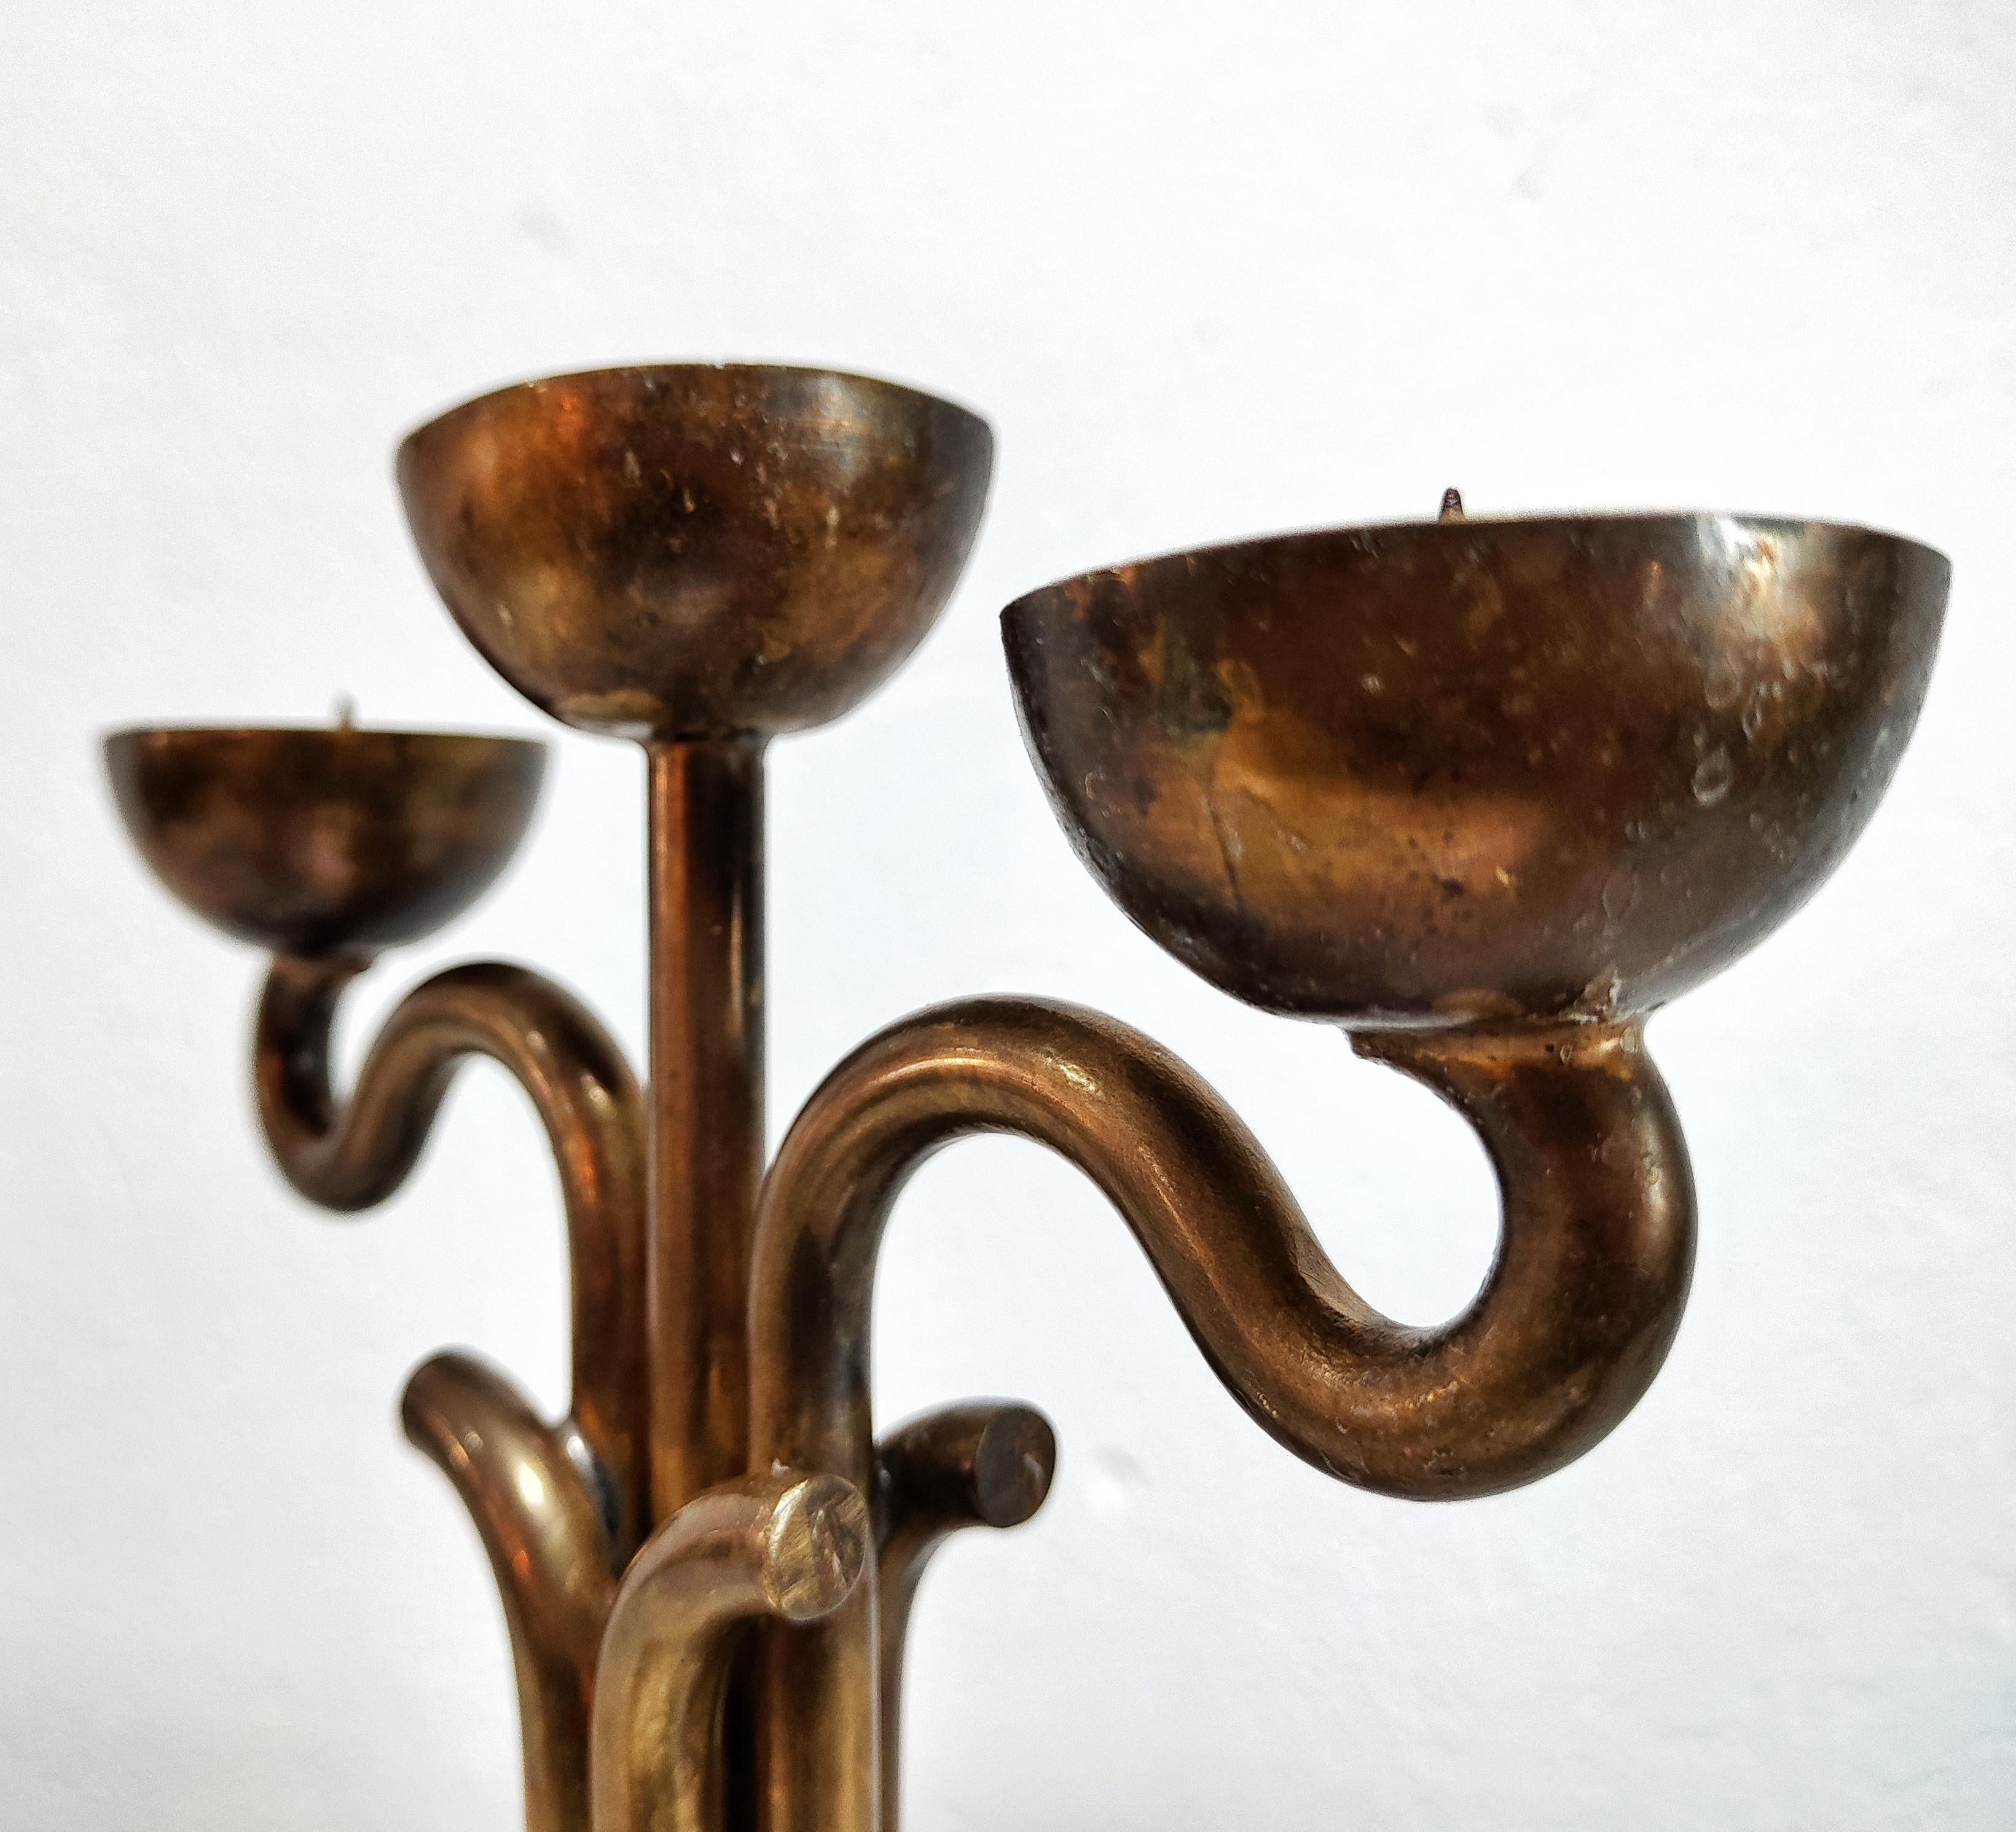 Brutalist Candlestick Holder Done in Brass and Nickel, Italy, 1970s For Sale 2